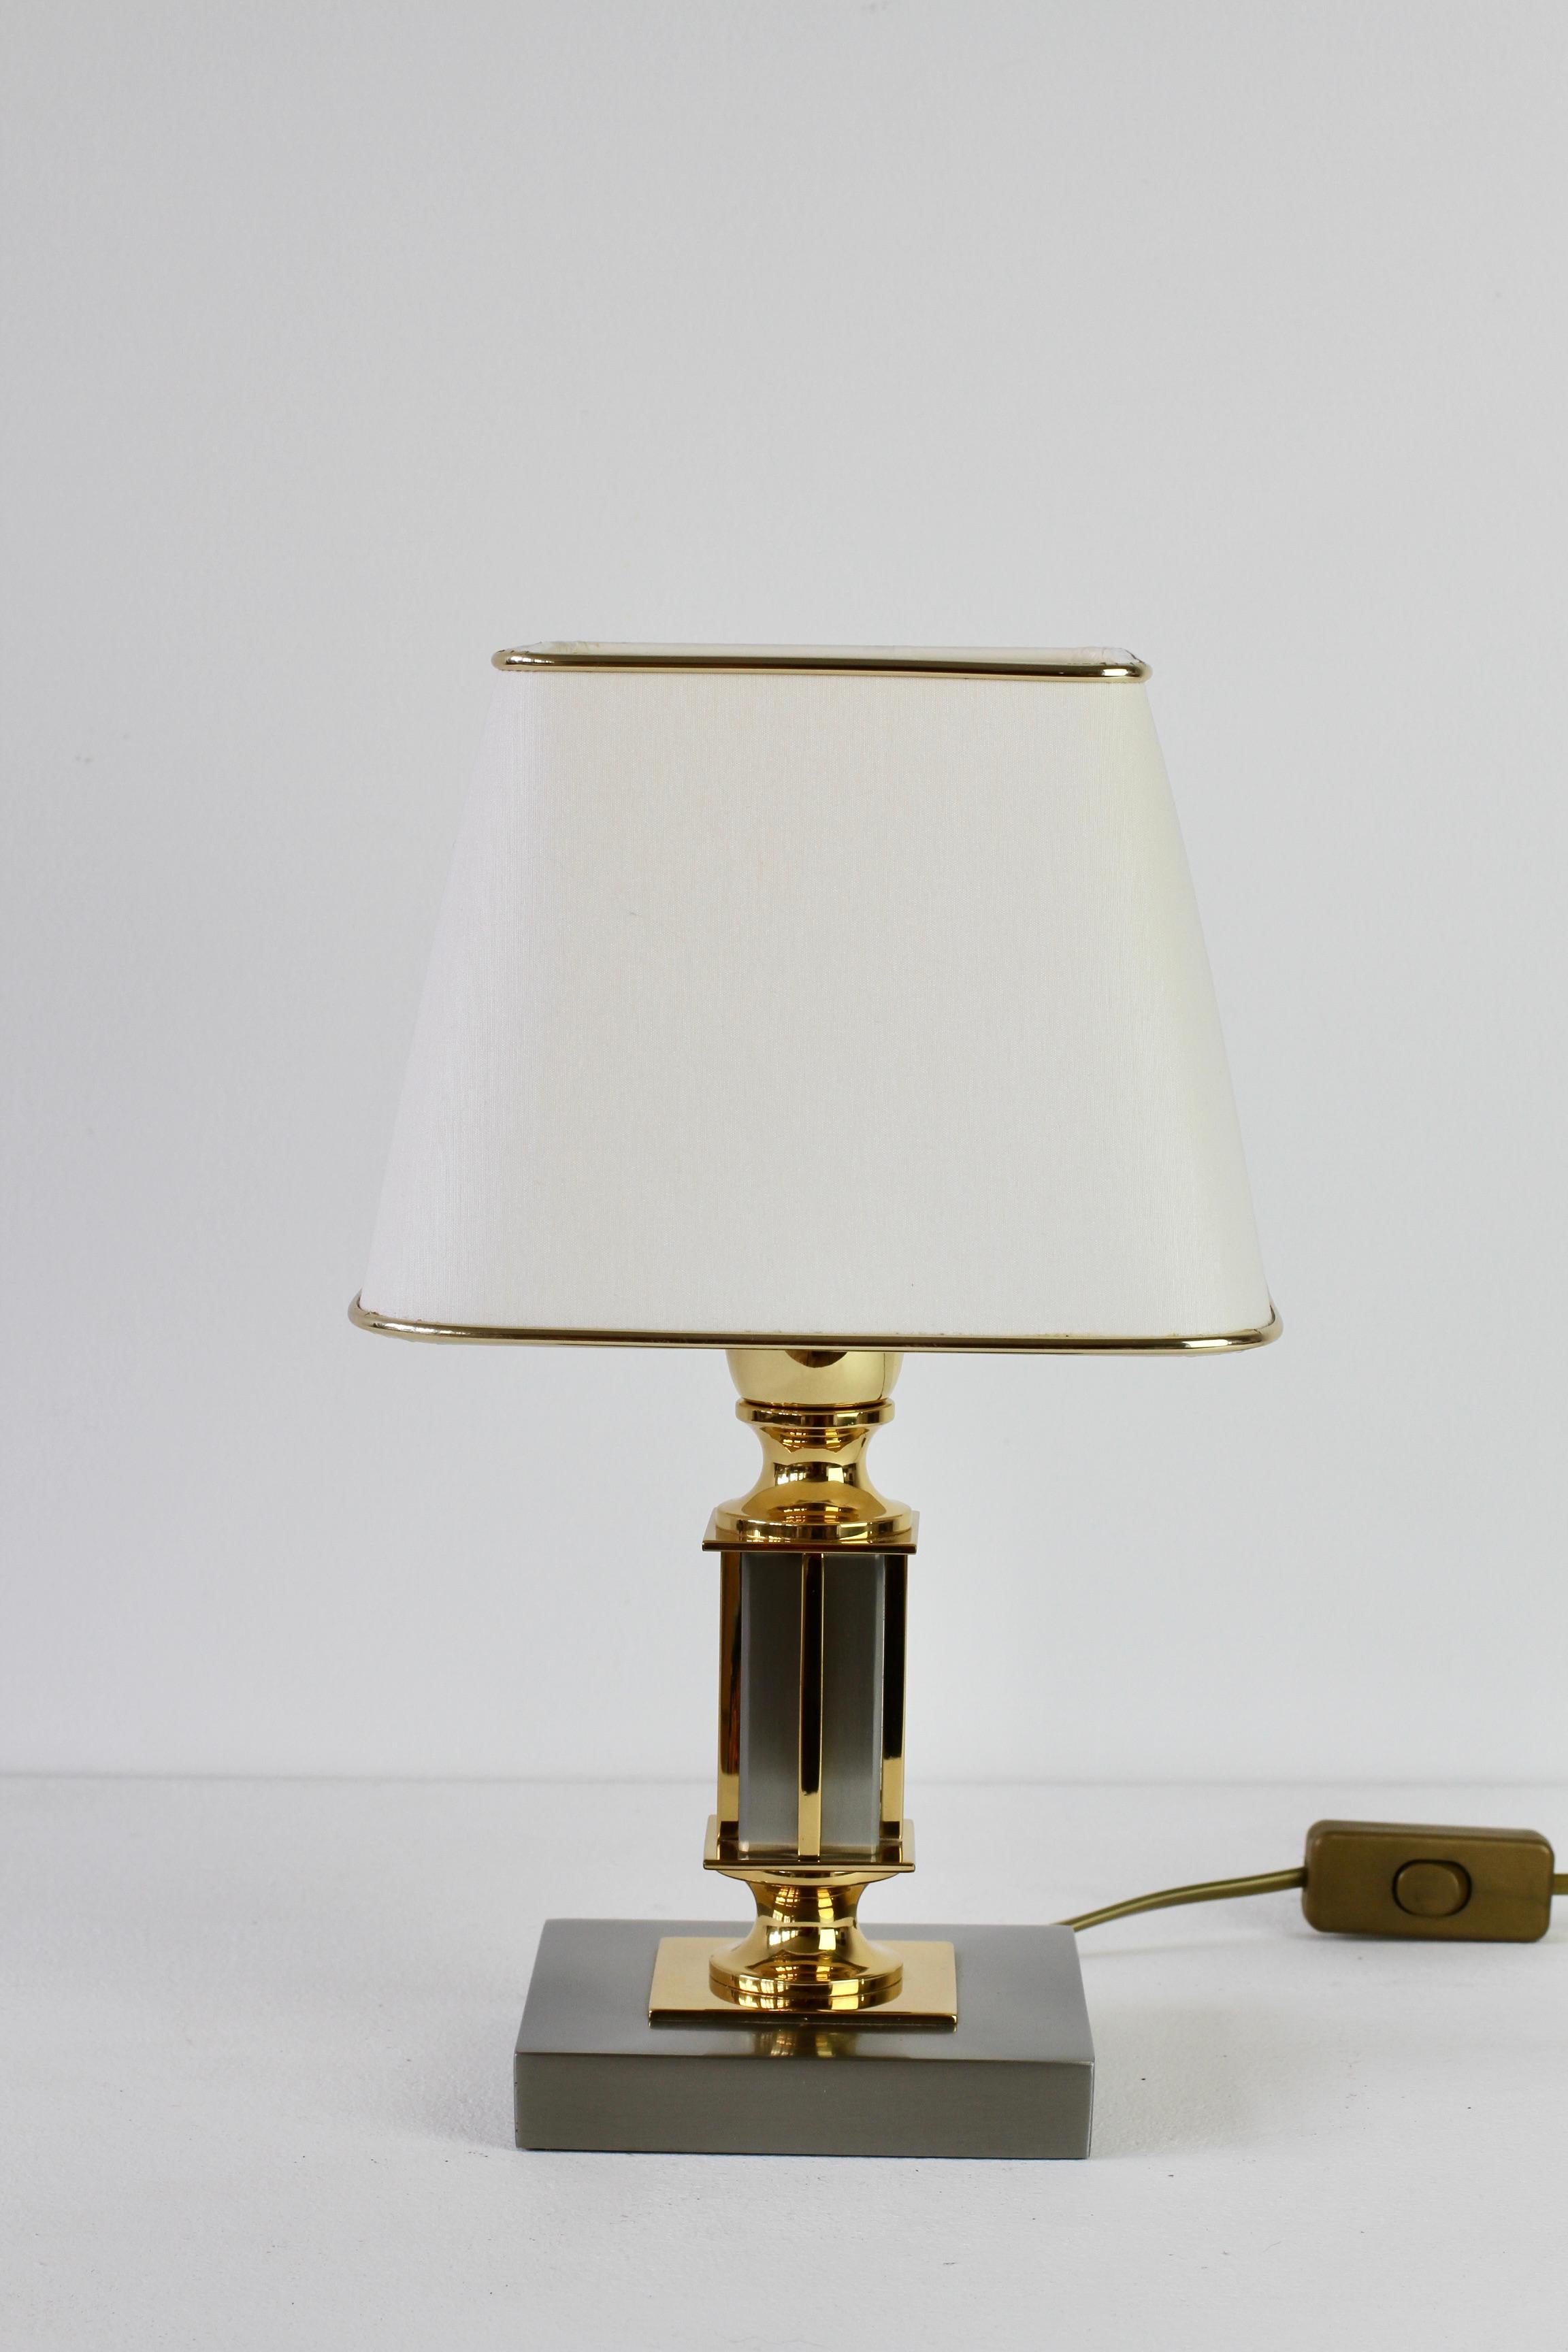 High quality Maison Jansen style table lamp in polished brass and brushed steel, circa 1980s. This vintage design piece would fit within the Hollywood Regency, Brutalist and Mid-Century as well as modern styles. We are not sure who the manufacturer